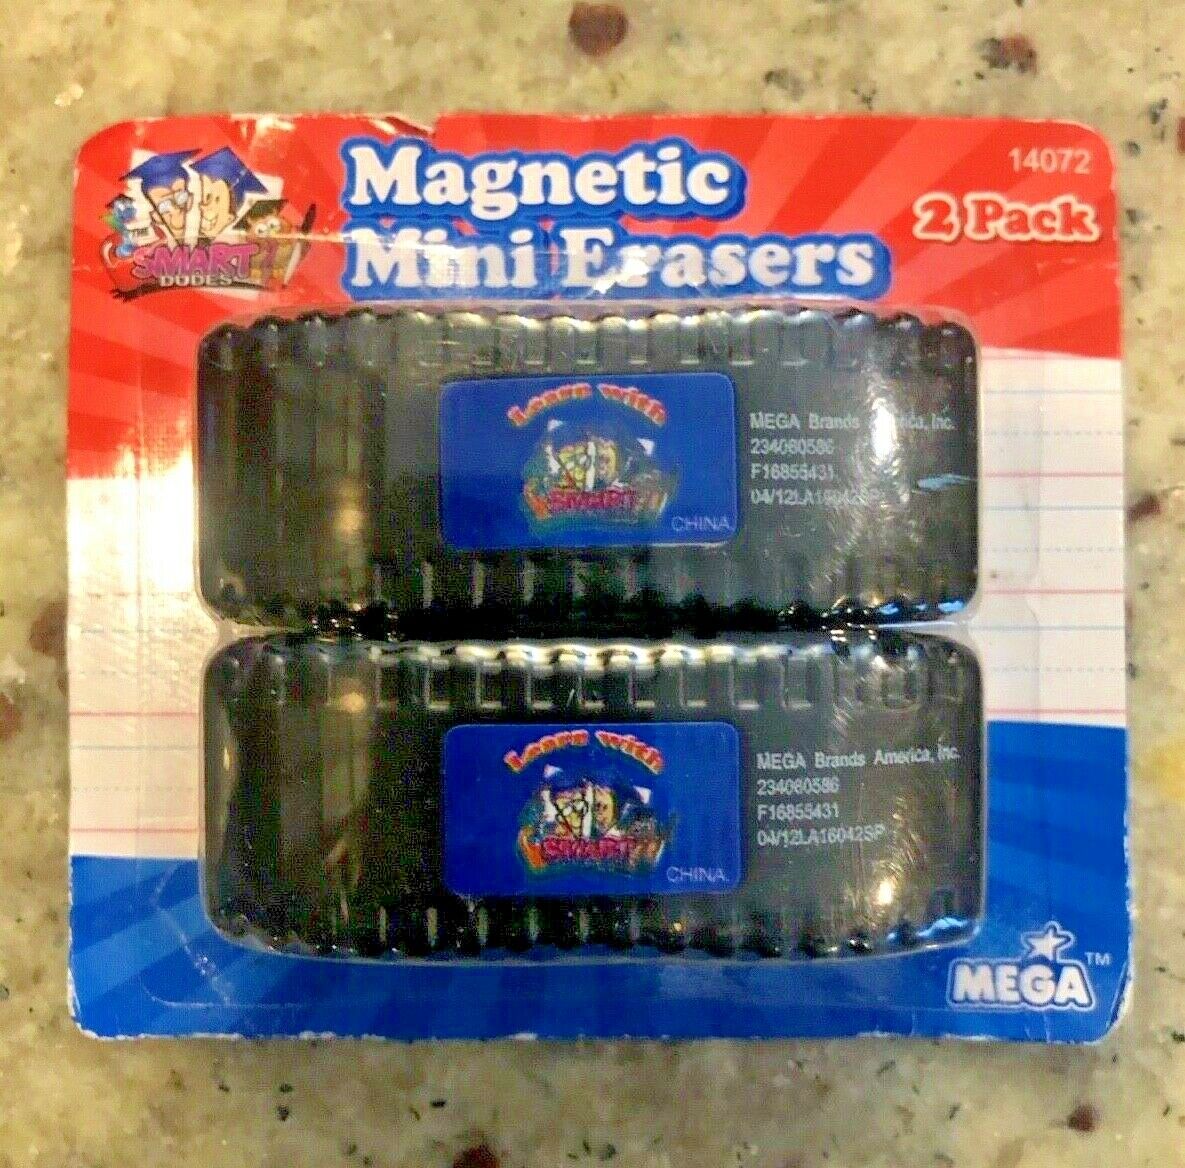 Magnetic Mini Dry-erase Erasers 2 Pack By Mega New In Package